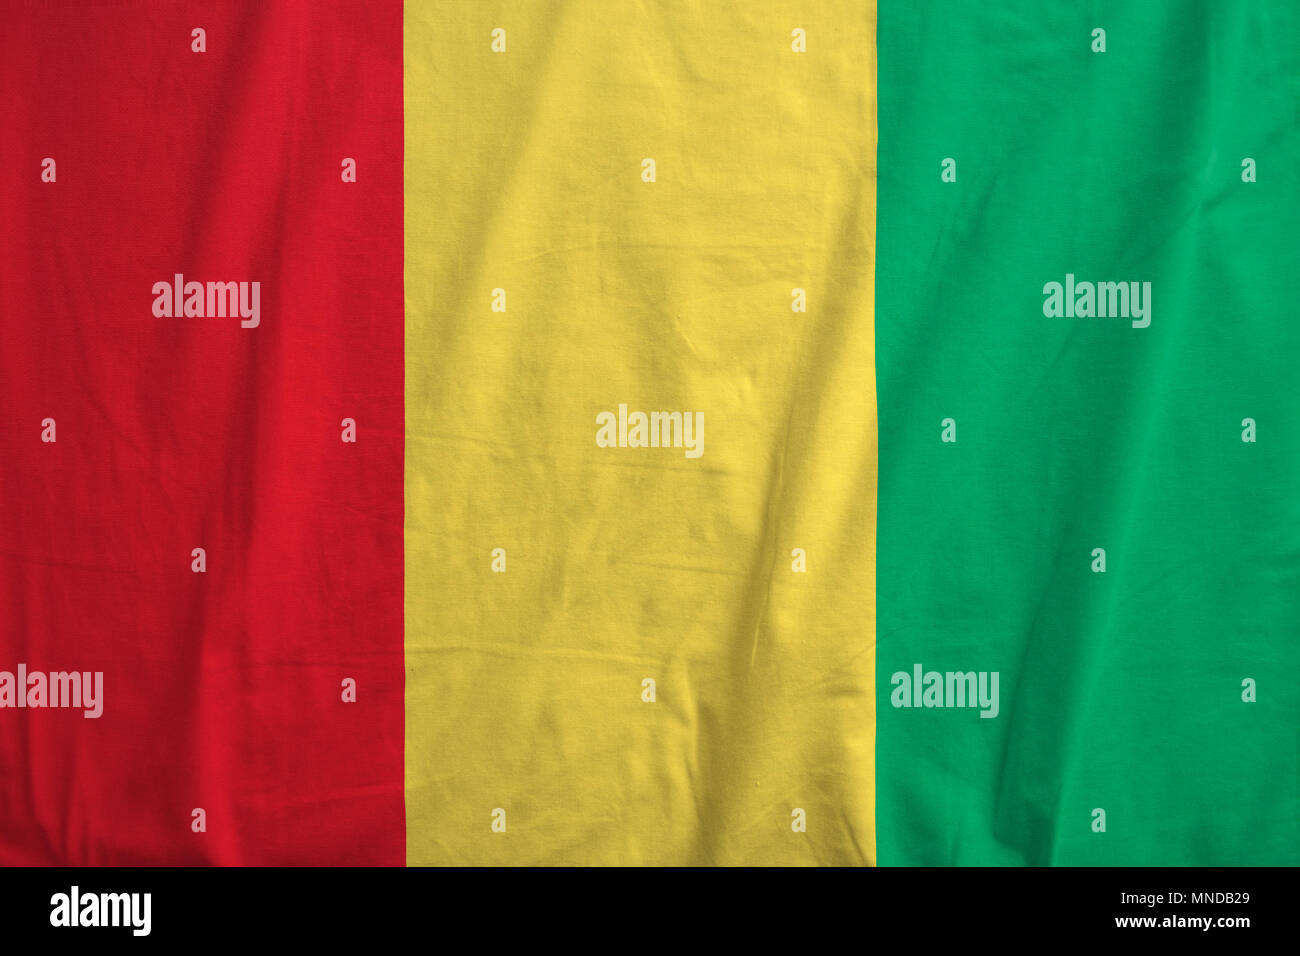 Fabric texture of the flag of Guinea Stock Photo